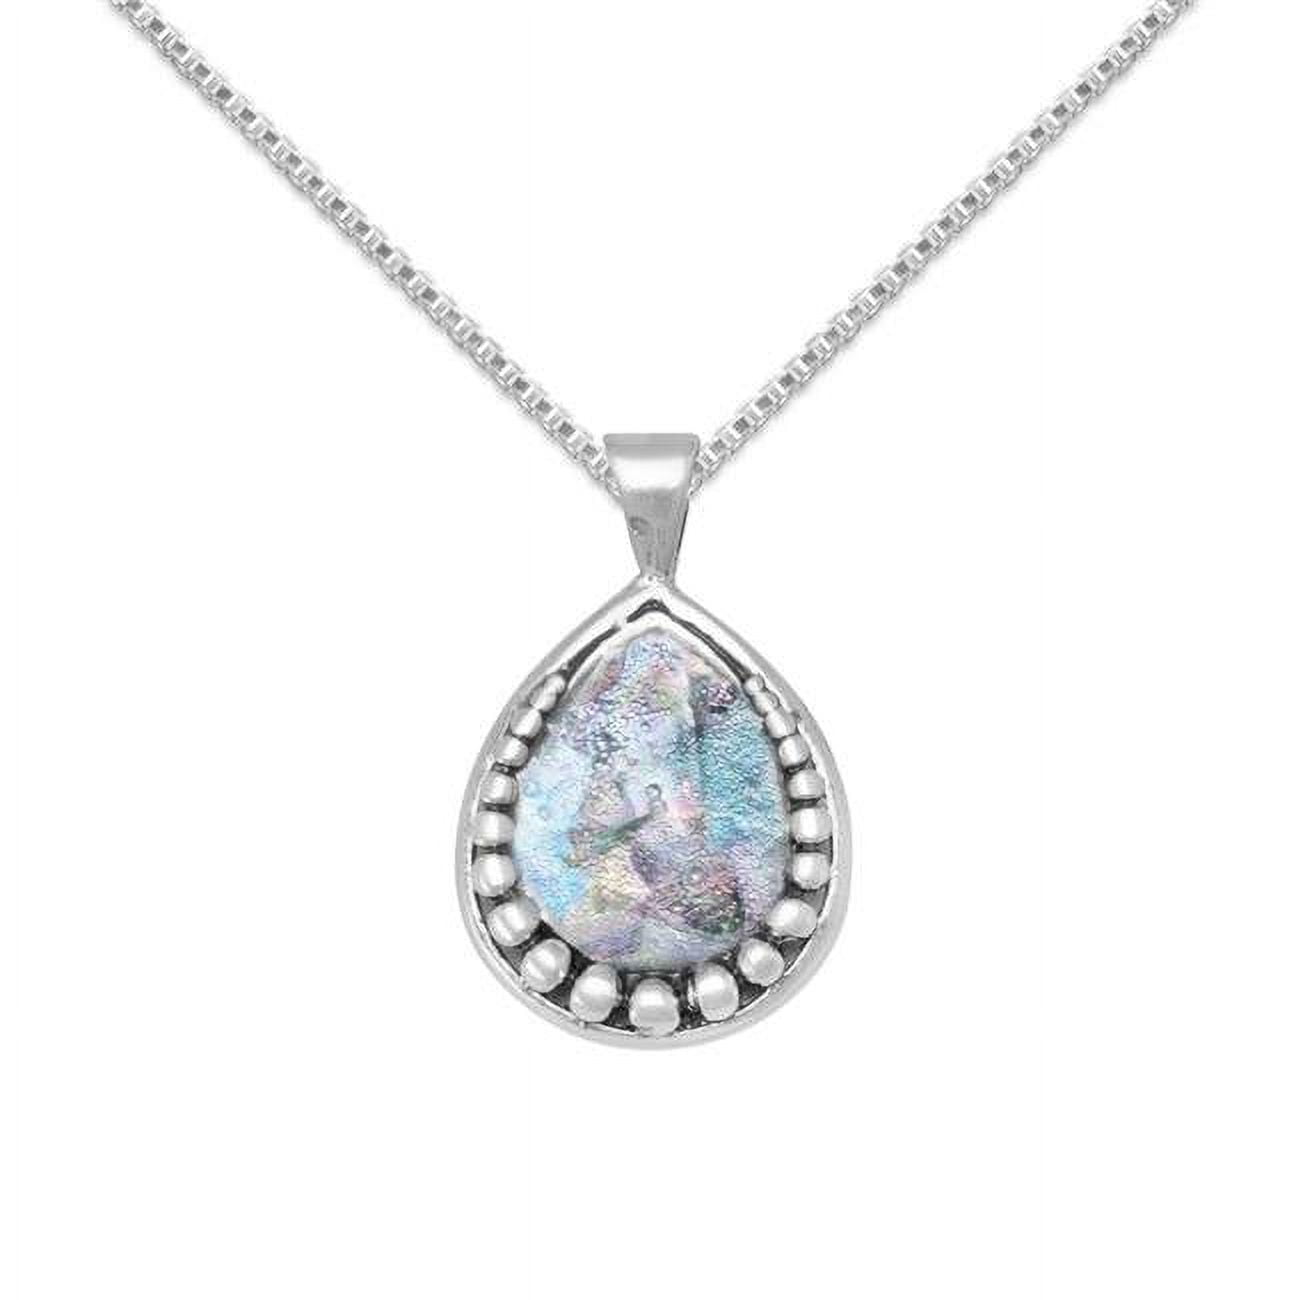 73444-20 20 In. Sterling Silver Pear Shape Roman Glass Pendant With 1.5 Mm Box Chain